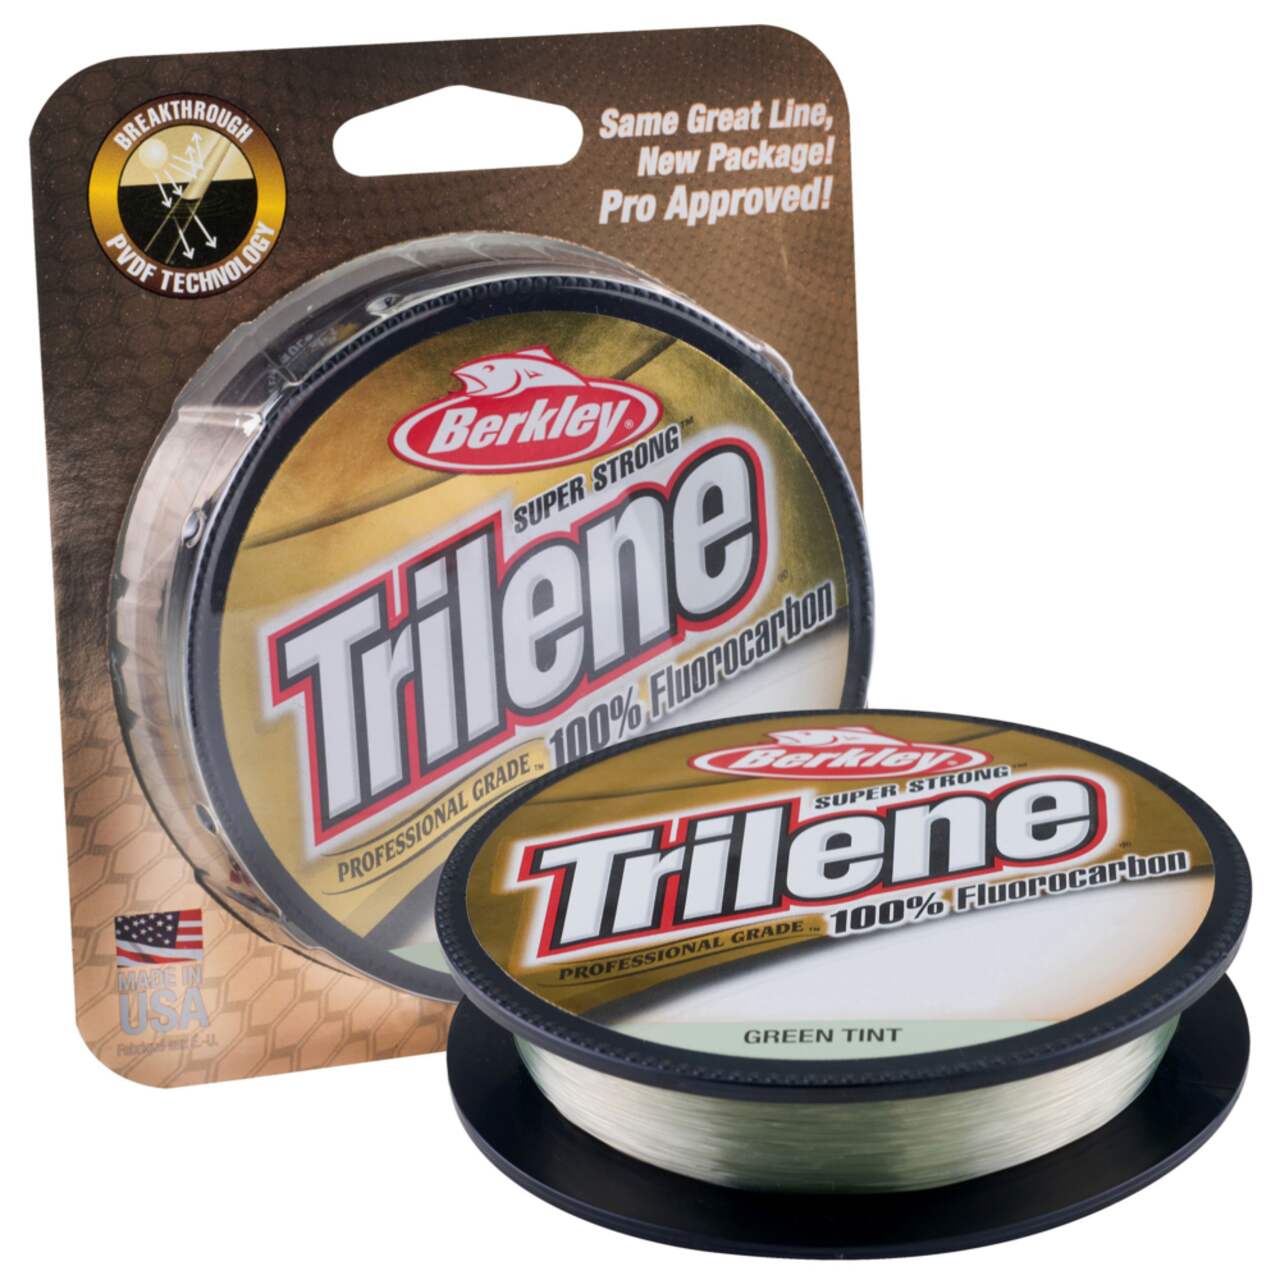 Triple Fish 15 lb Test Fluorocarbon Leader Fishing Line, Clear, 0.35 mm/100  yd : : Sports, Fitness & Outdoors